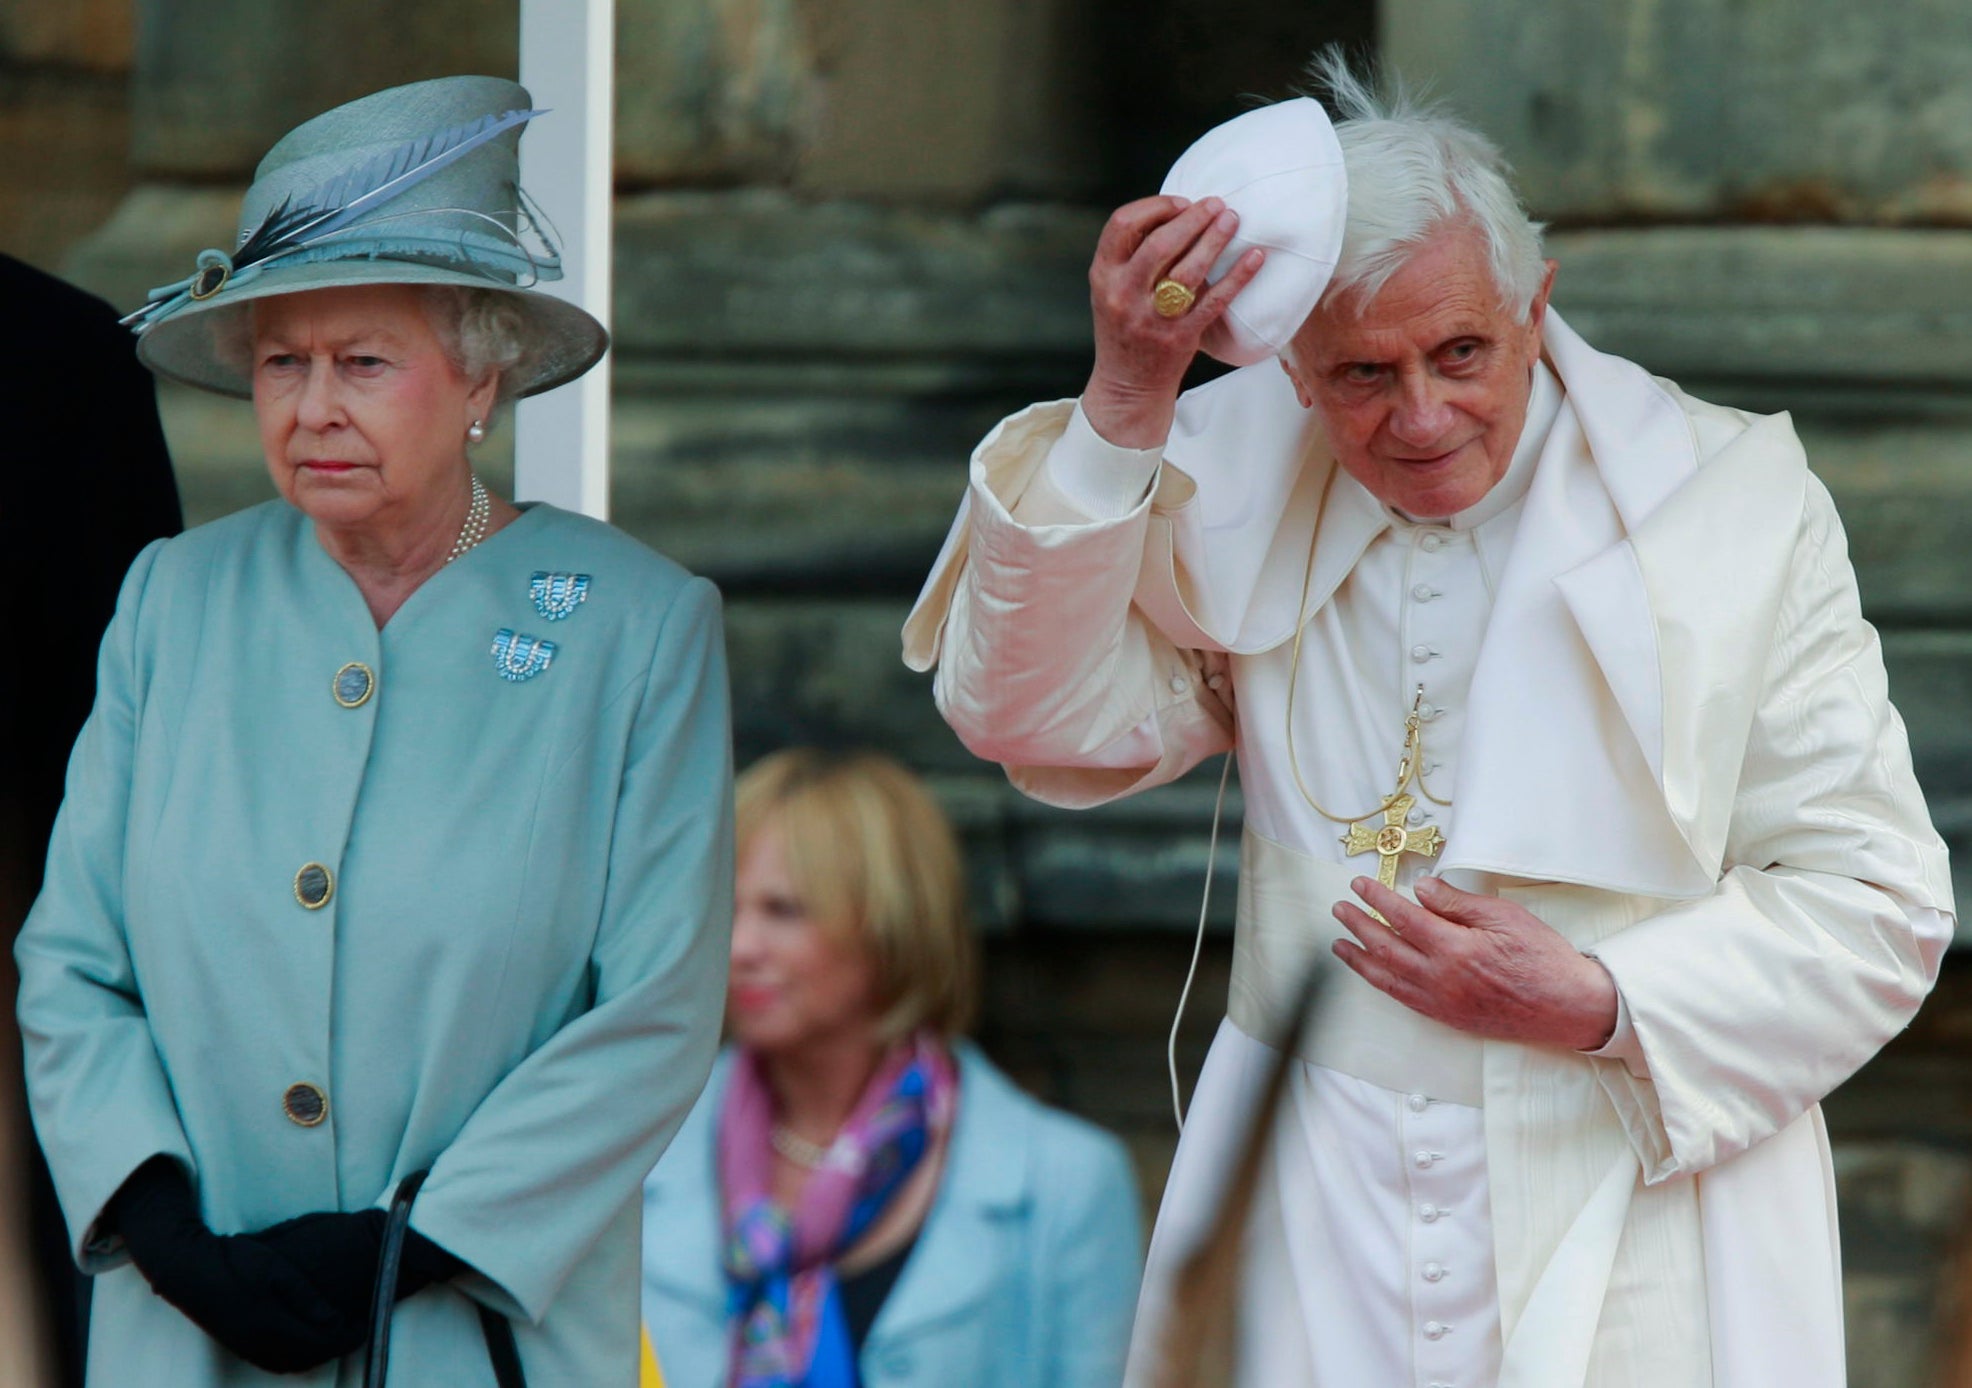 The Pope with the Queen during a visit to Scotland